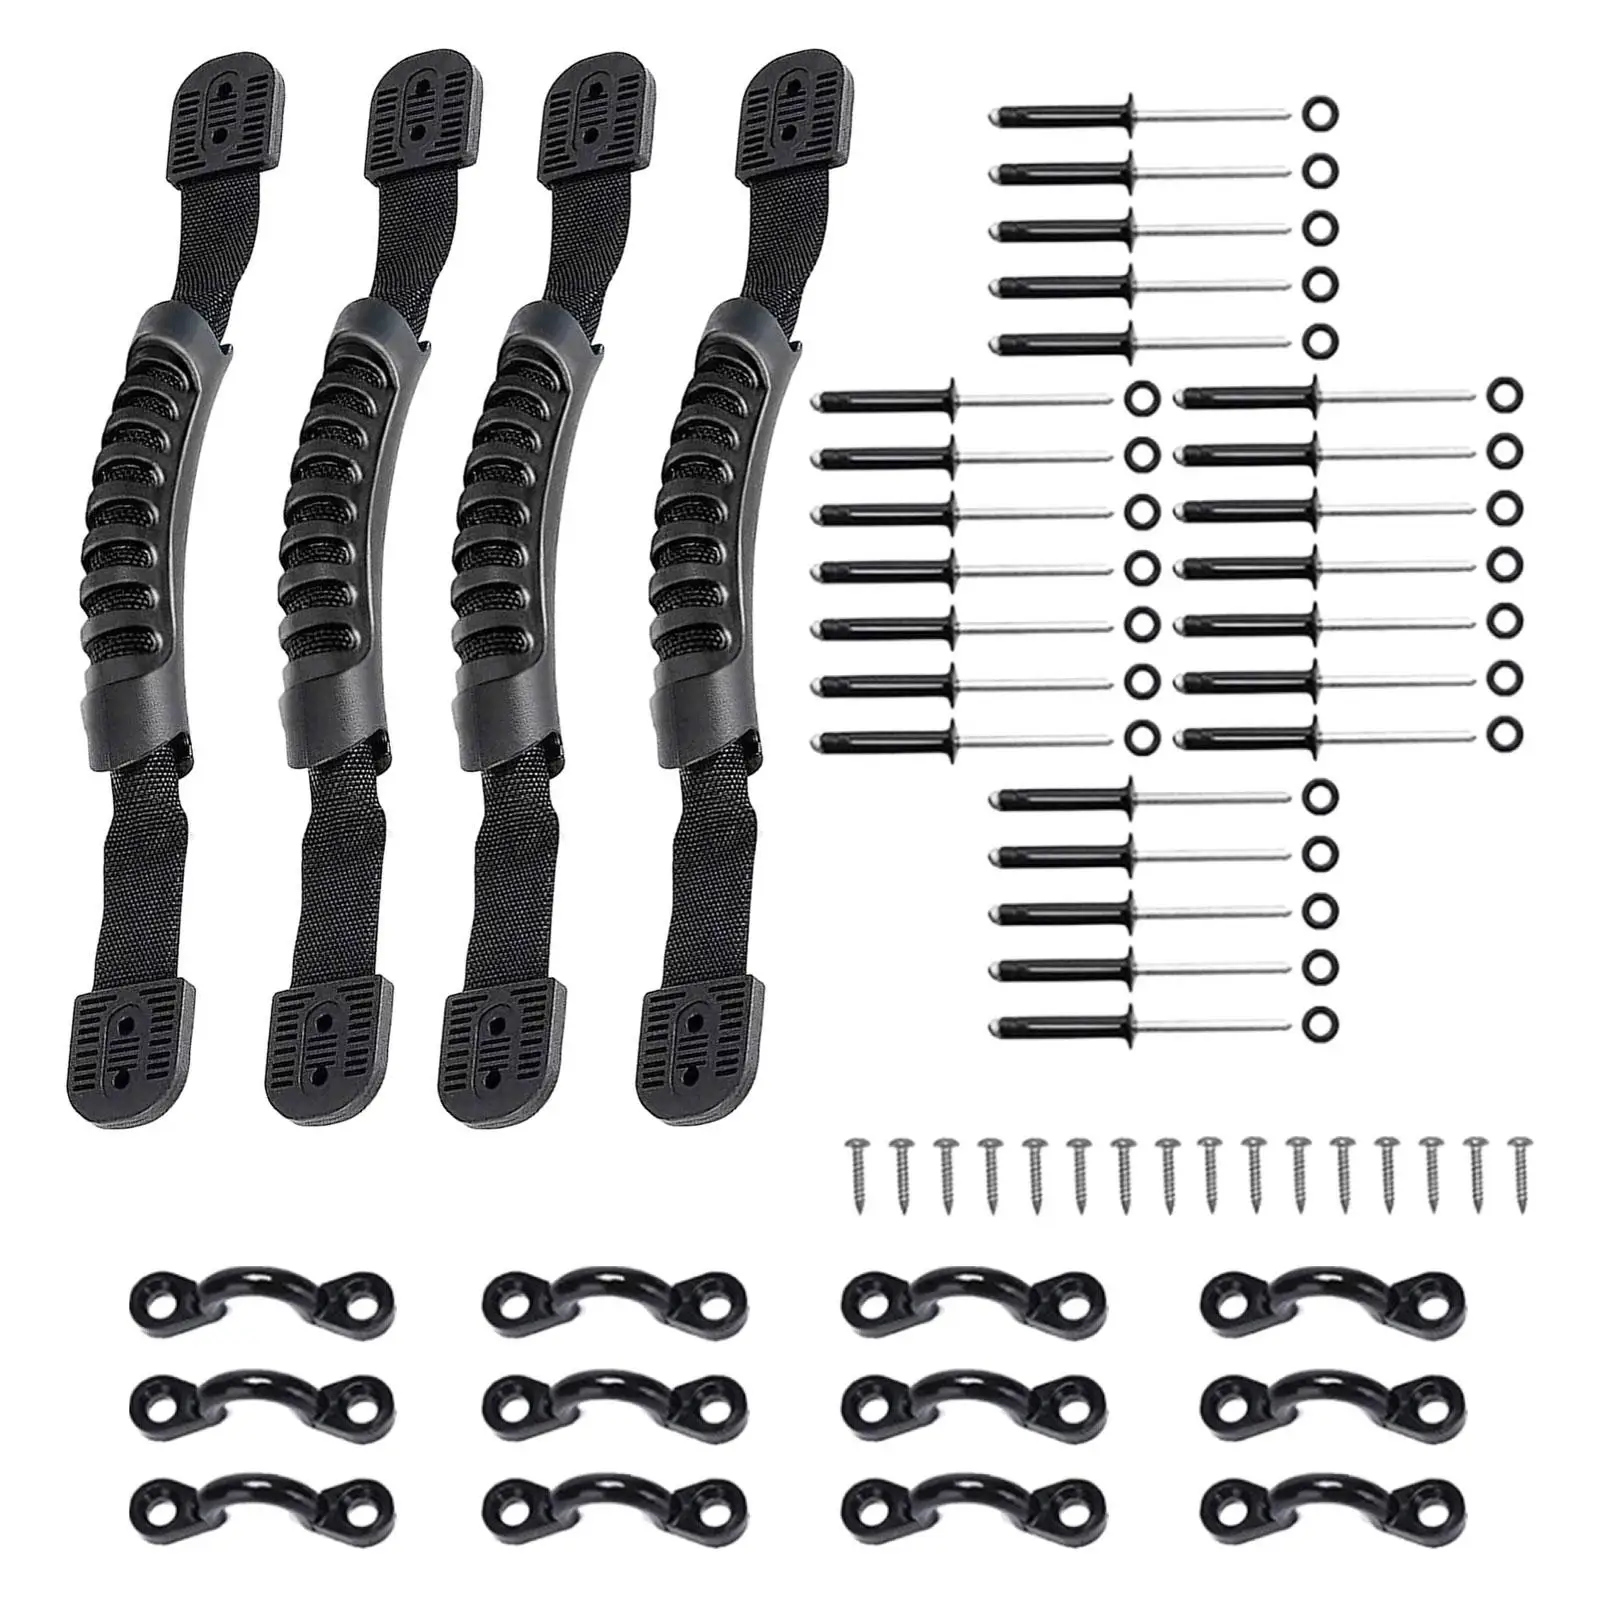 Kayak Handles Kit DIY Durable Hardware Kayak Carry Replacement Handles Canoe Handle for Suitcase Outdoor Sports Canoe Boat Parts